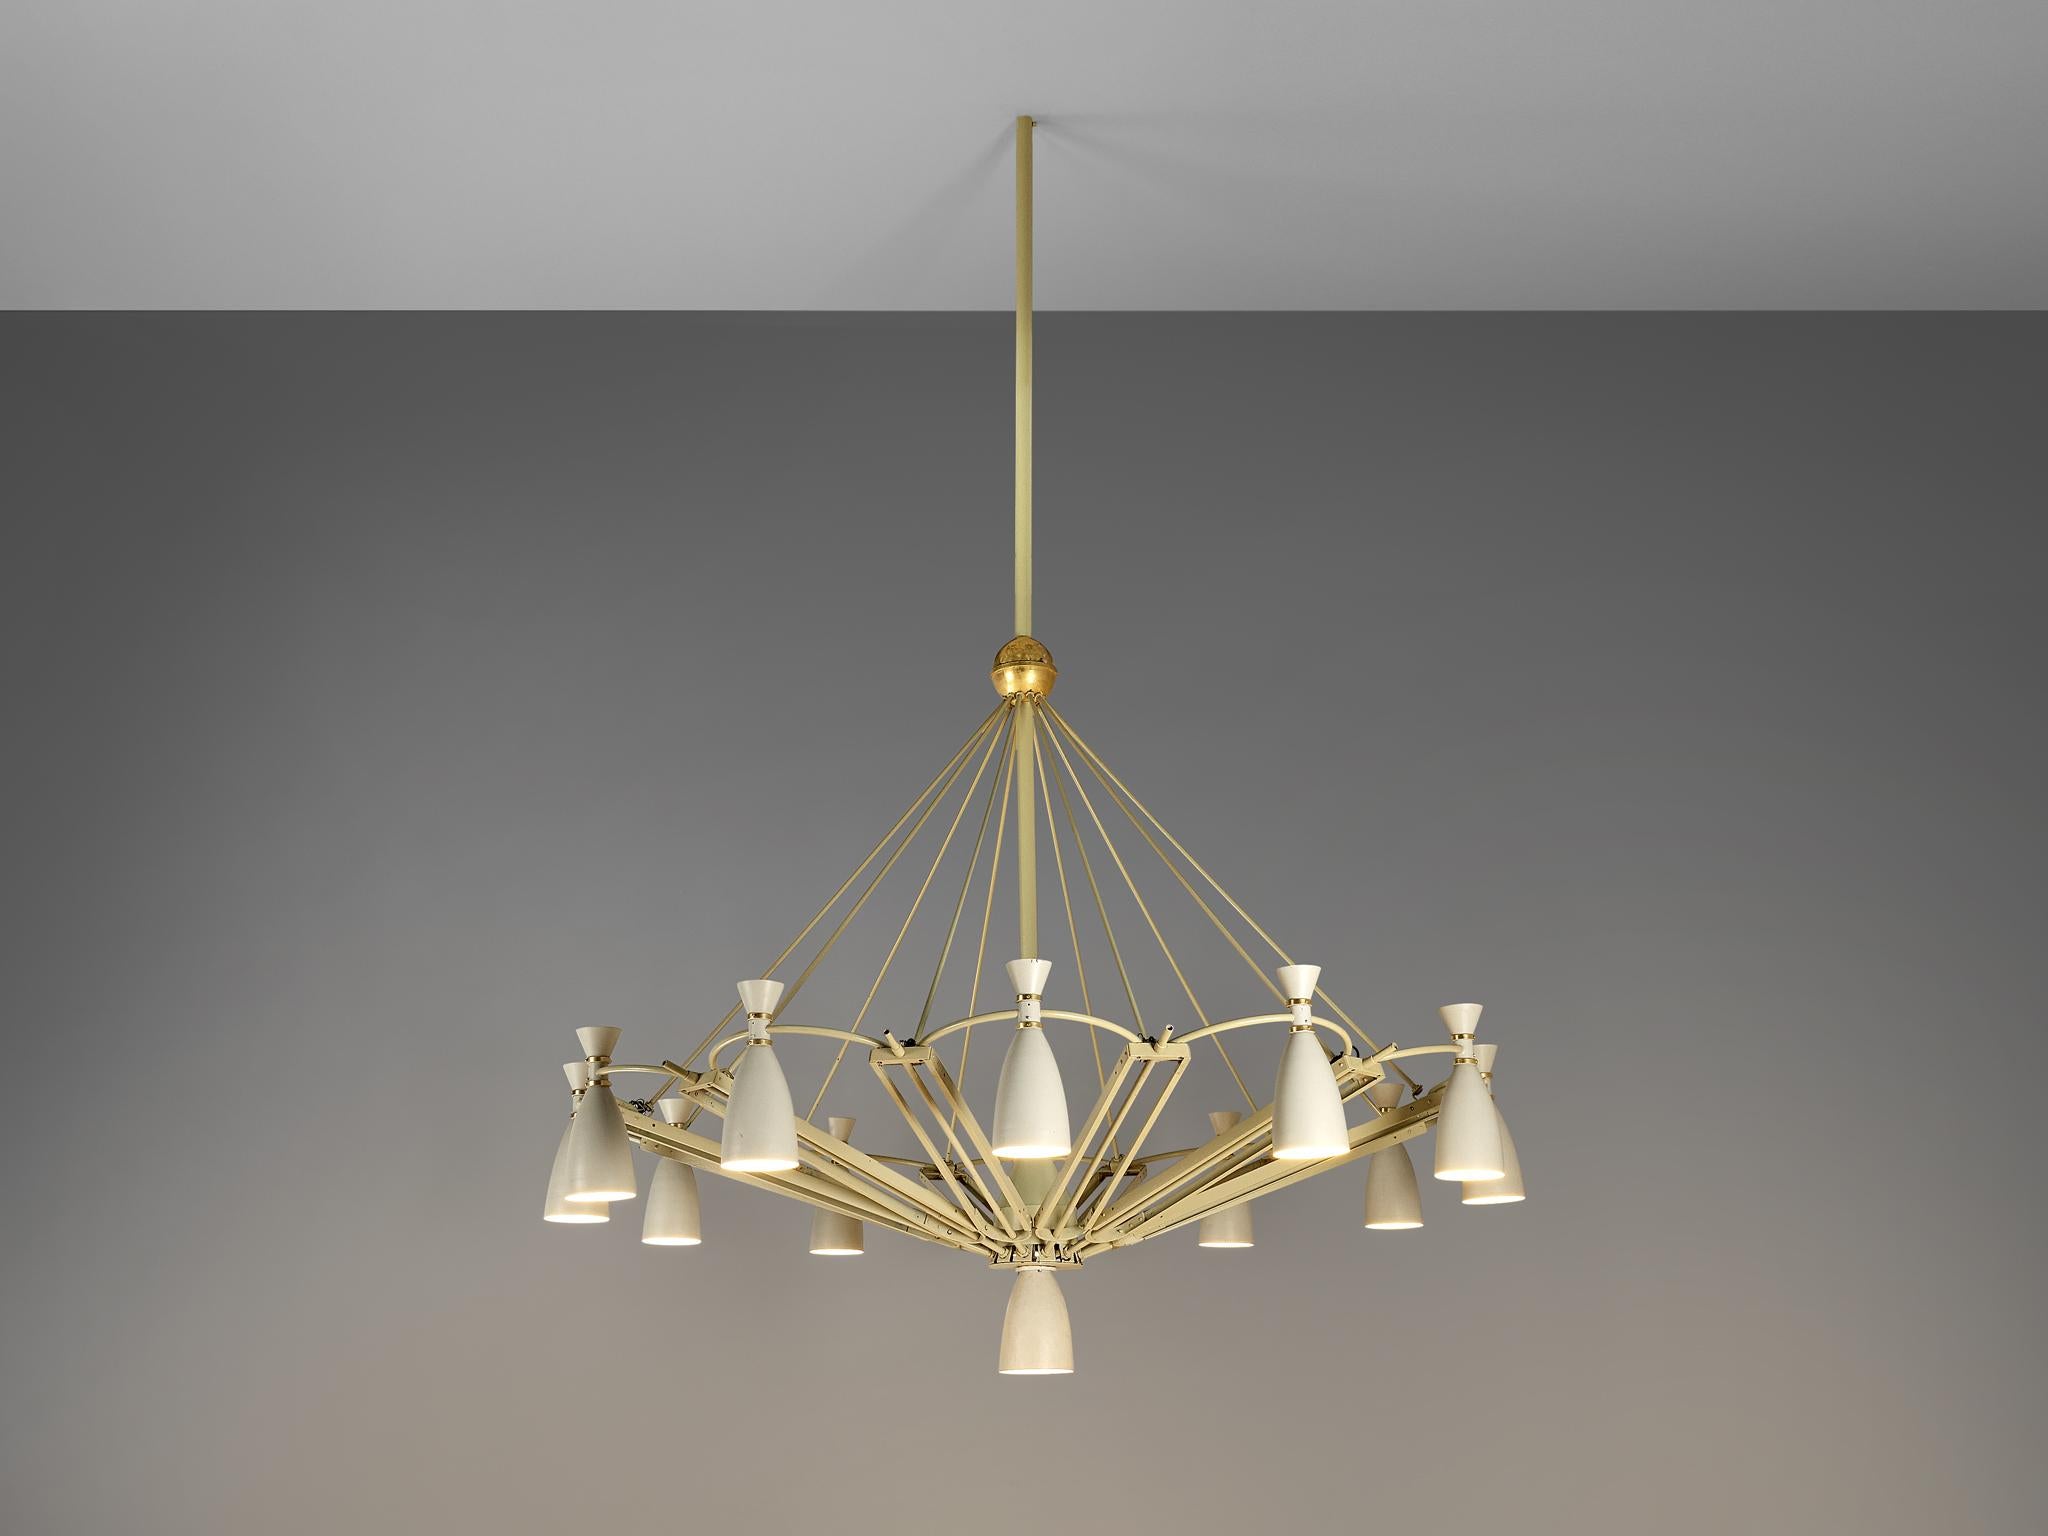 Chandelier, lacquered metal, The Netherlands, 1960s

Monumental, bright and very large chandelier. This light is specially made for a church in Delft, The Netherlands in the 1960s. Designed to provide a bright enough light source for a grand space,